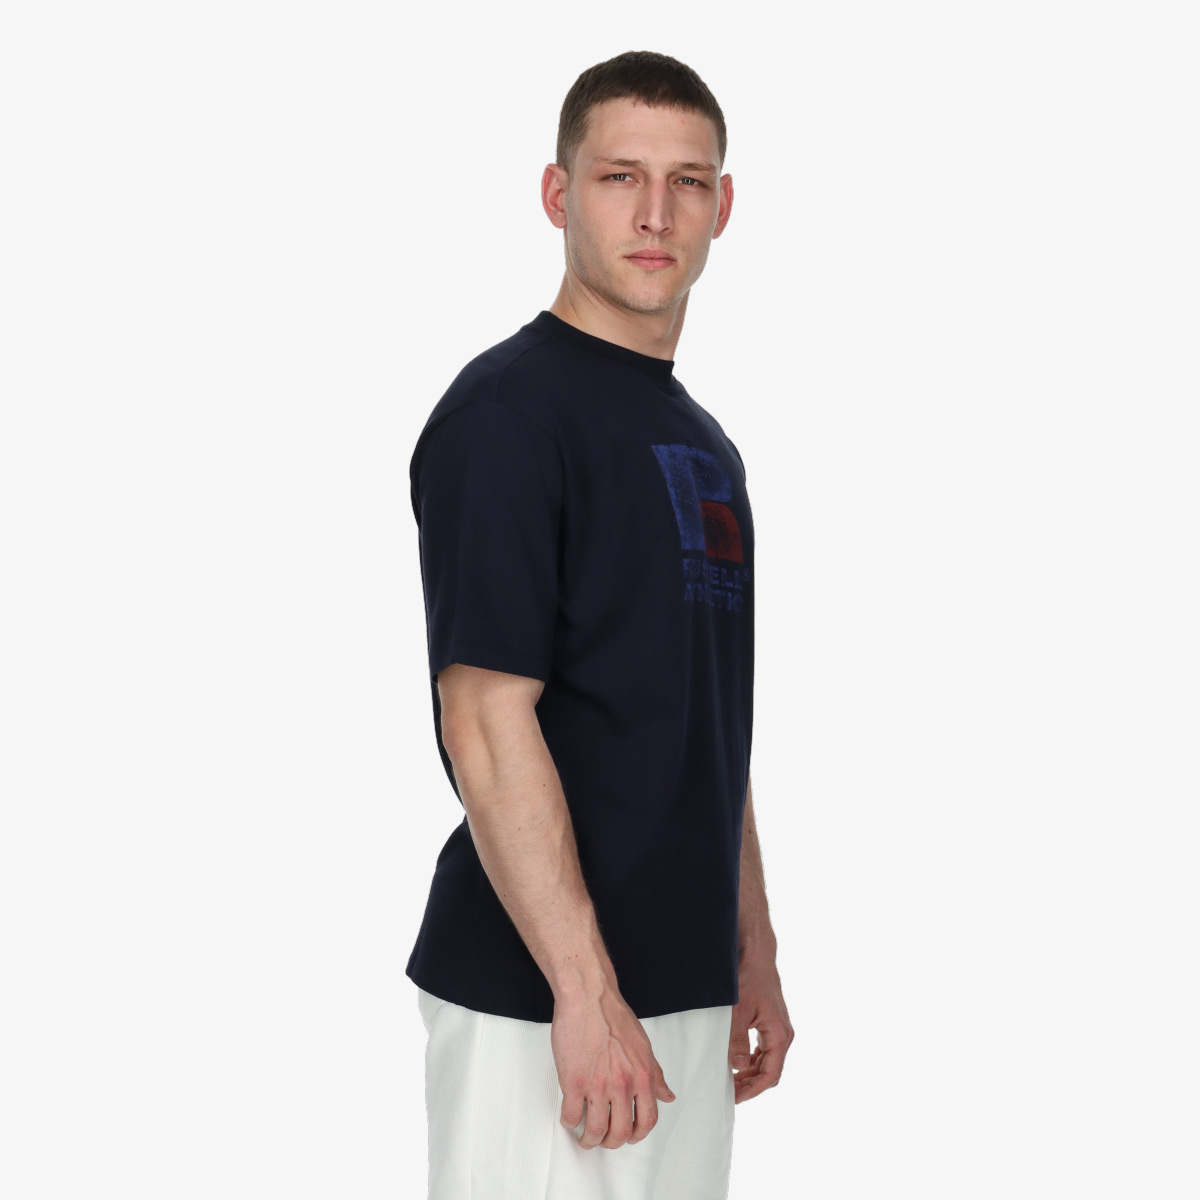 Russell Athletic Tricouri Skepta S/S 